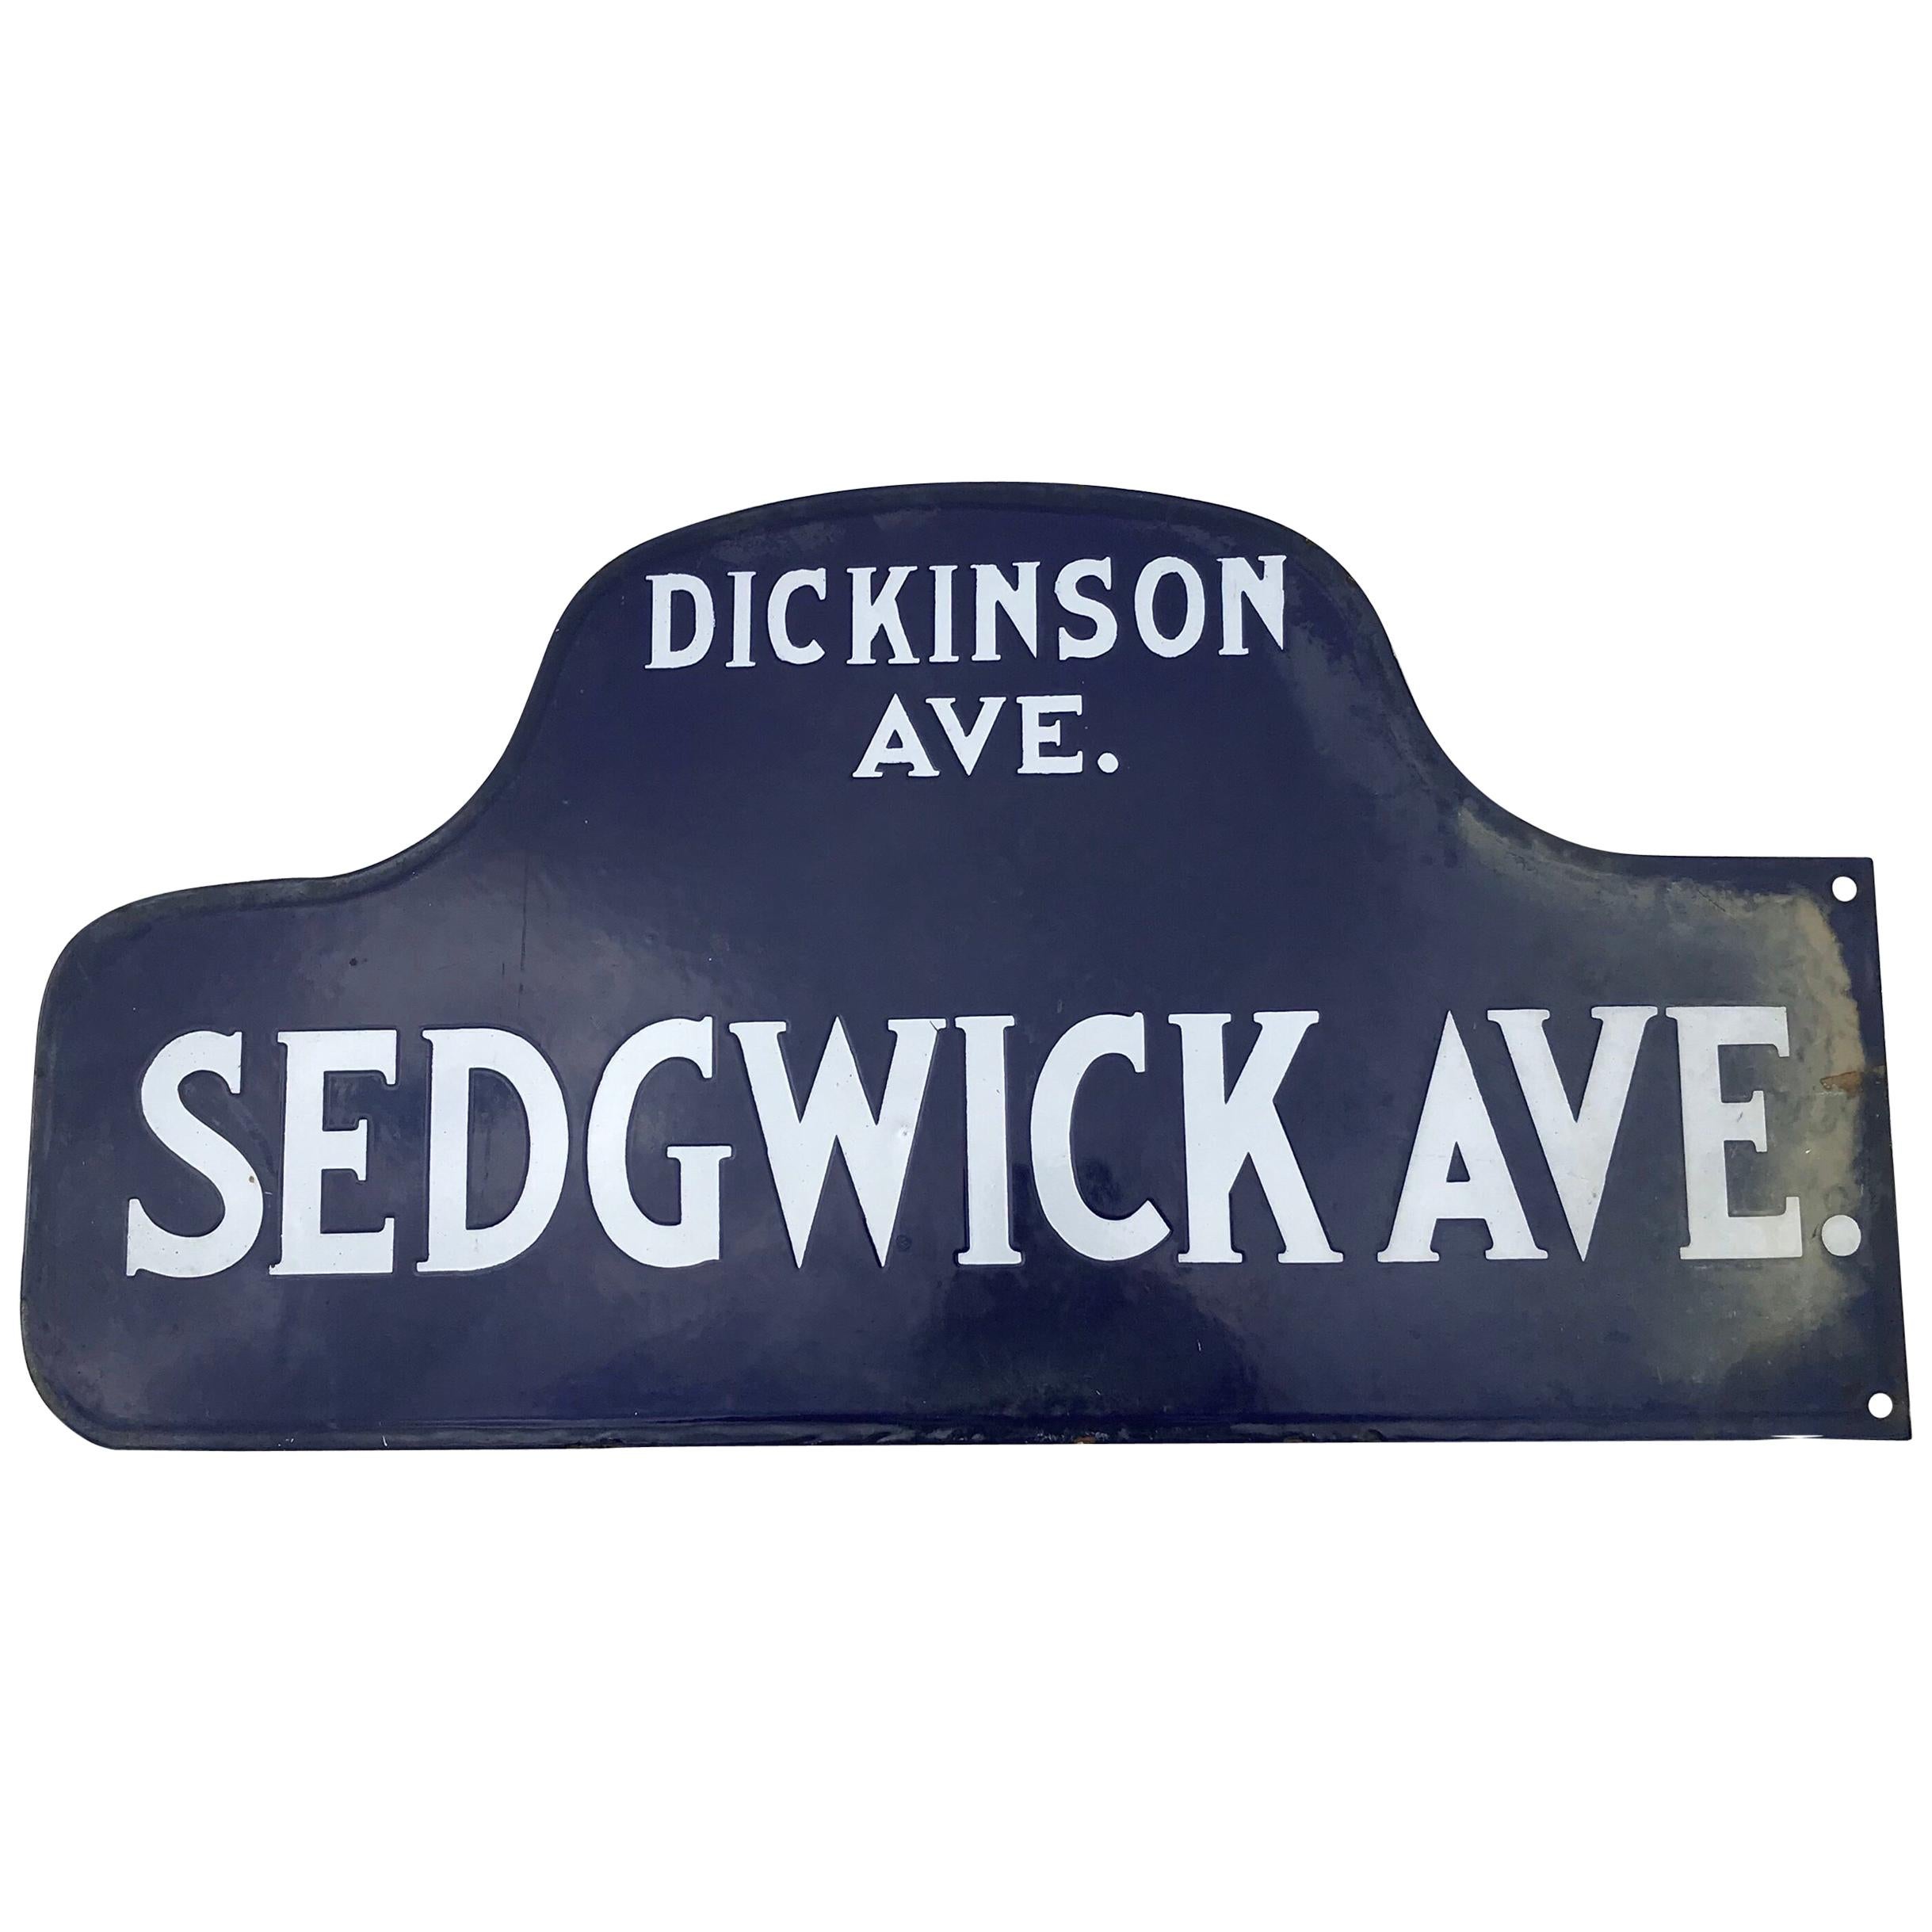 Antique Porcelain Humpback Double Sided NYC Street Sign For Sale